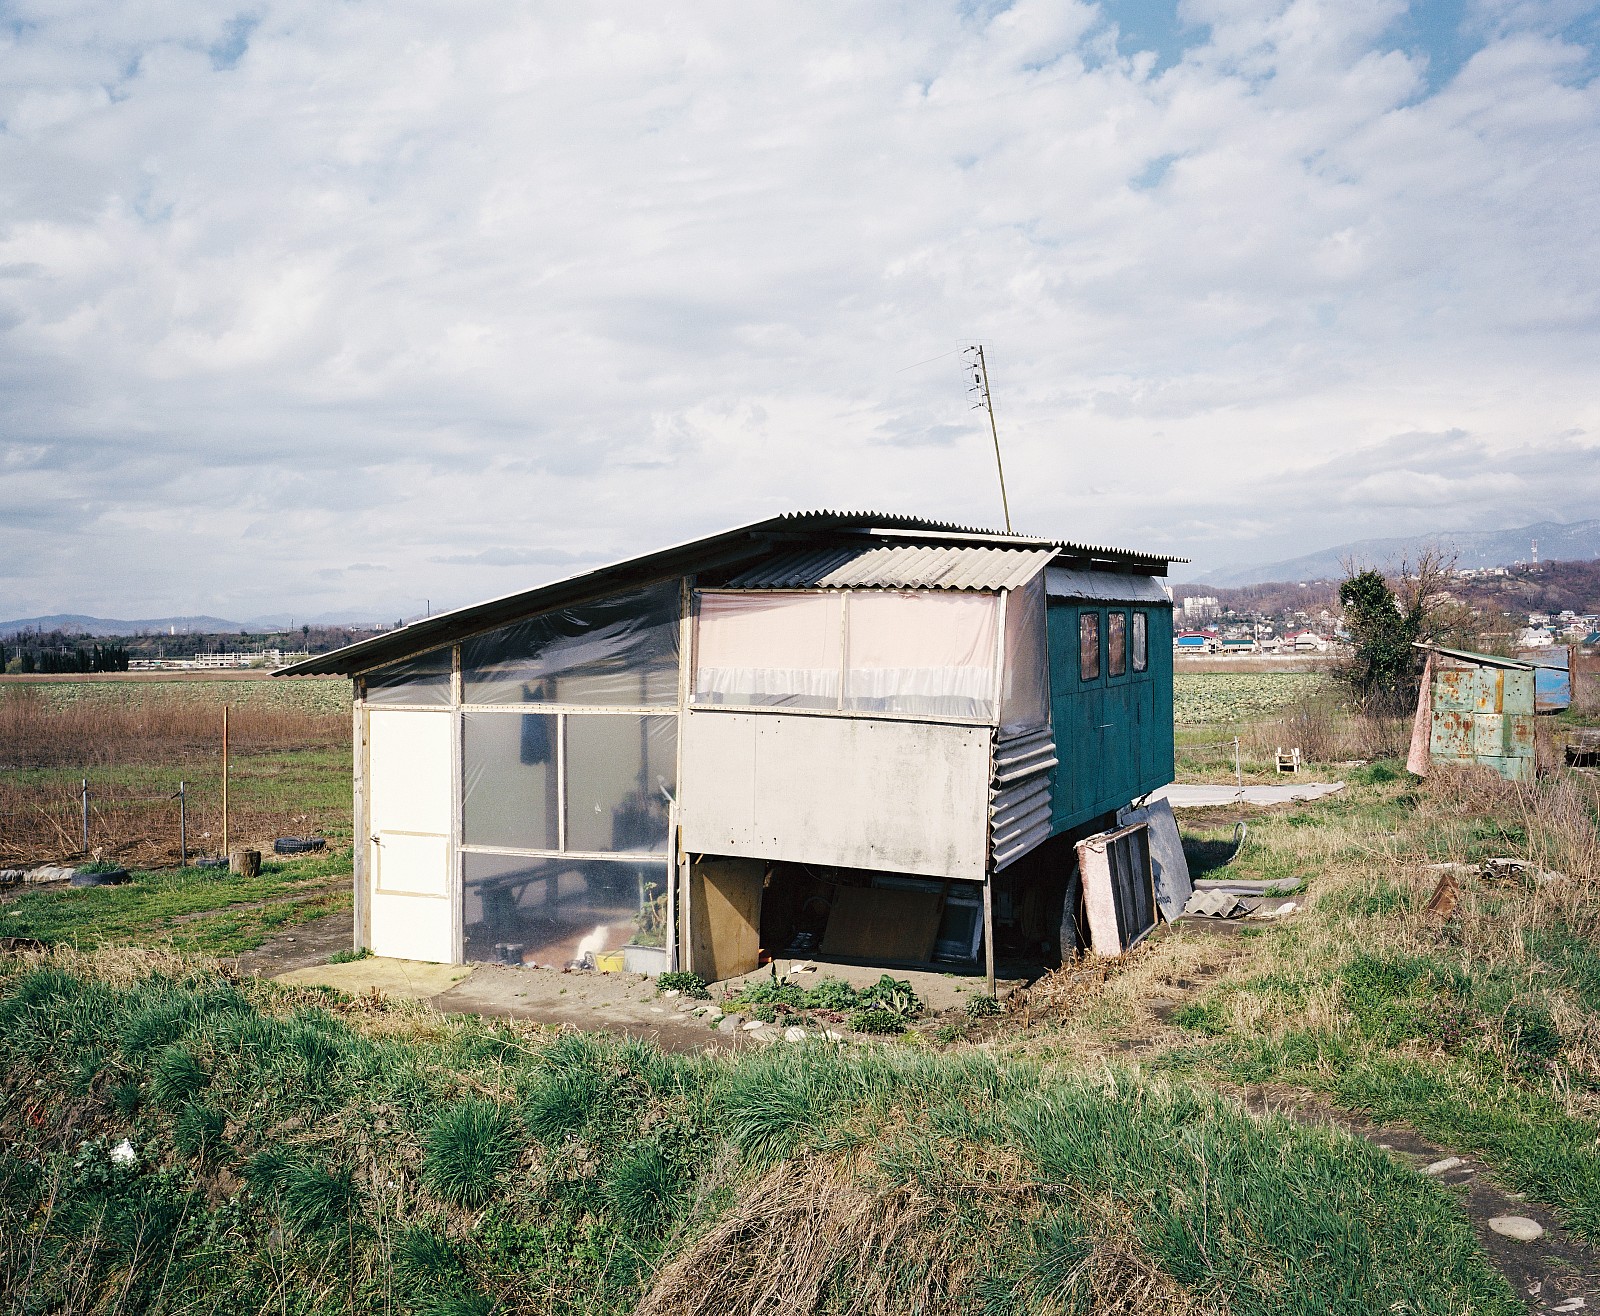 In 2009, state farm 'Russia' was fenced off with a big blue, Olympic fence. Refugees from Abkhazia were allowed to temporarily farm the land. They lived in this caravan.